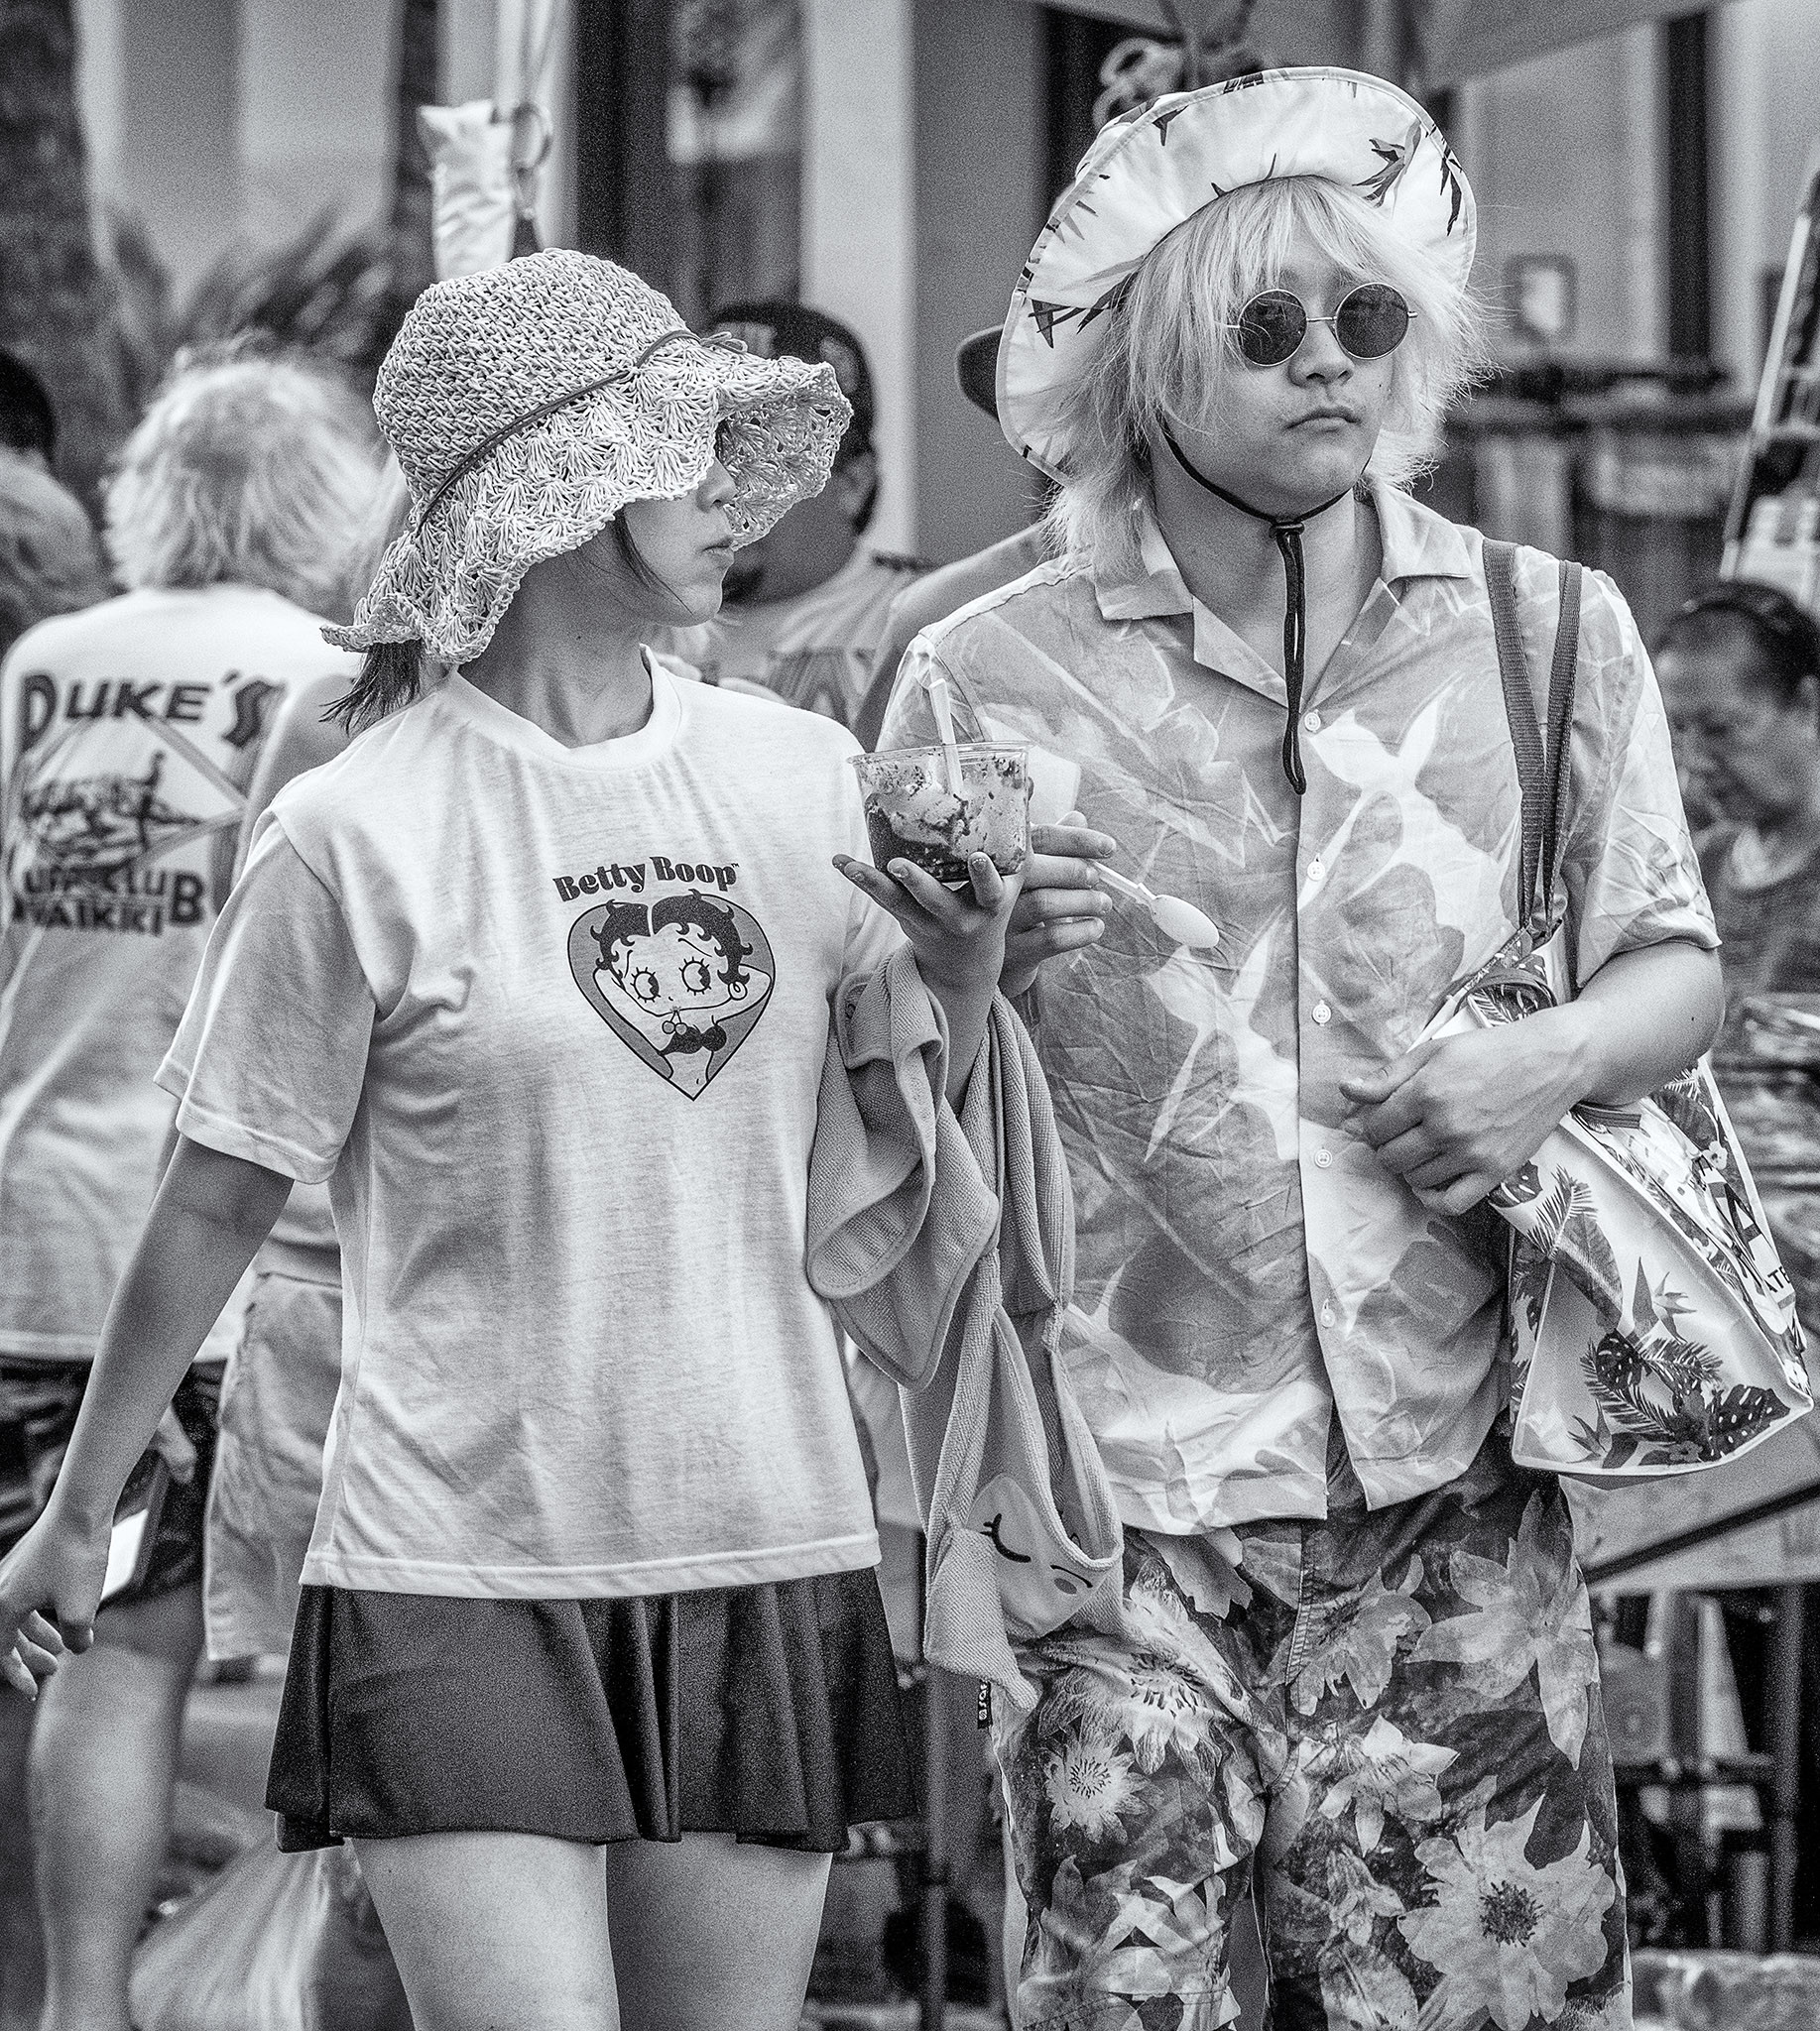 Couple walking along street near Waikiki in Honolulu. She has a Betty Boop t-shirt on ad is holding a frozen treat of some sort. He is dressed from head to foot in tropical-themed clothing, including hat and bag, wears round John Lennon style tinted glasses and is giving the photographer side-eye.